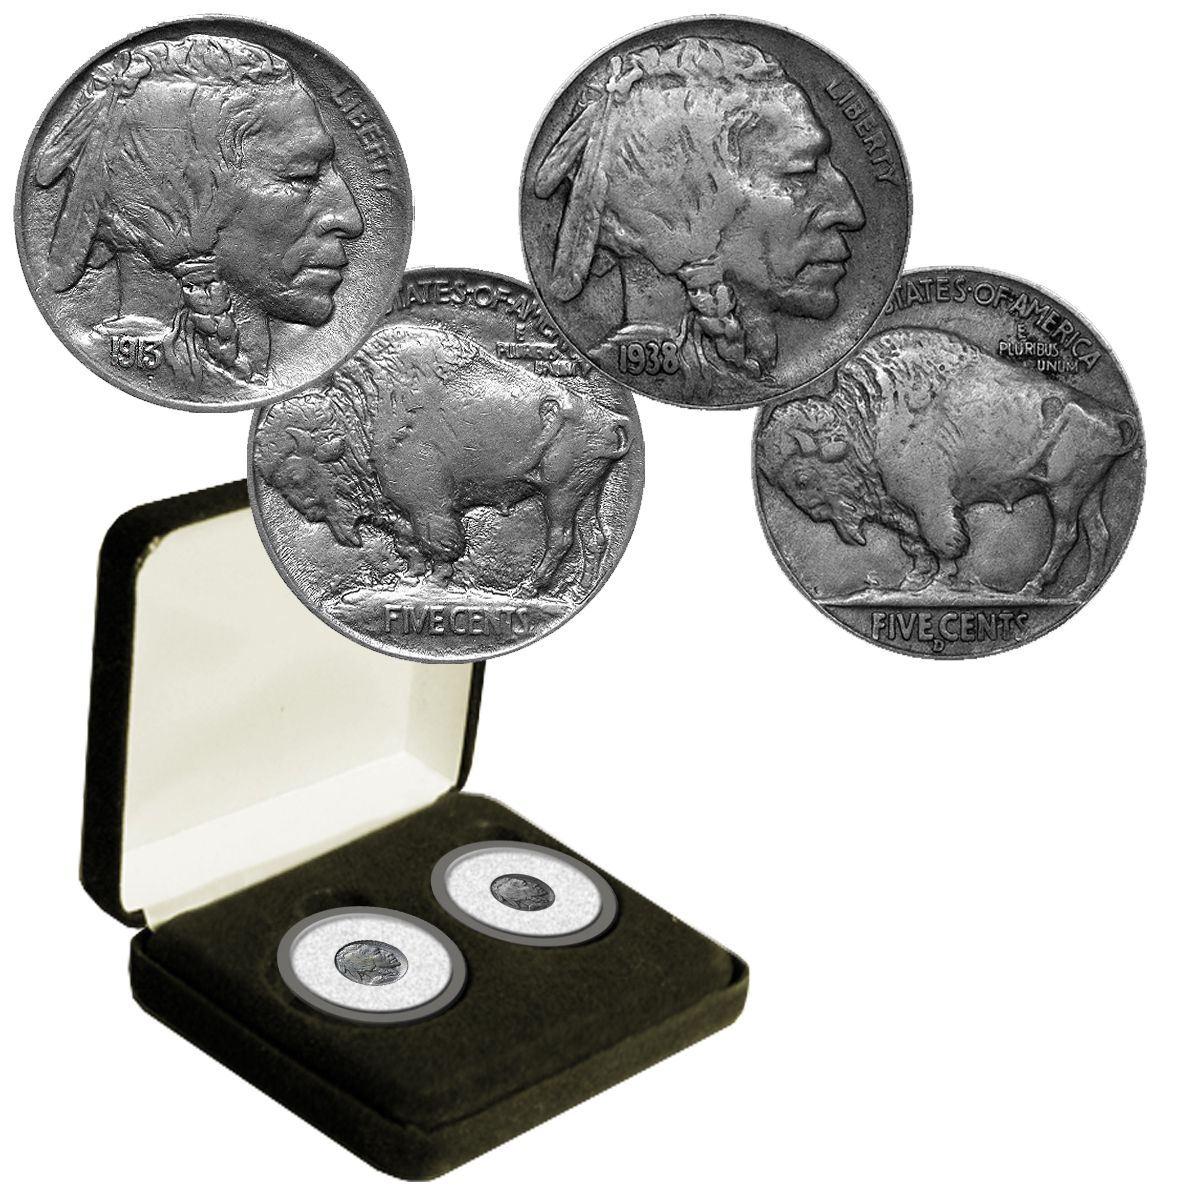 First and Last Buffalo Nickels - The Patriotic Mint